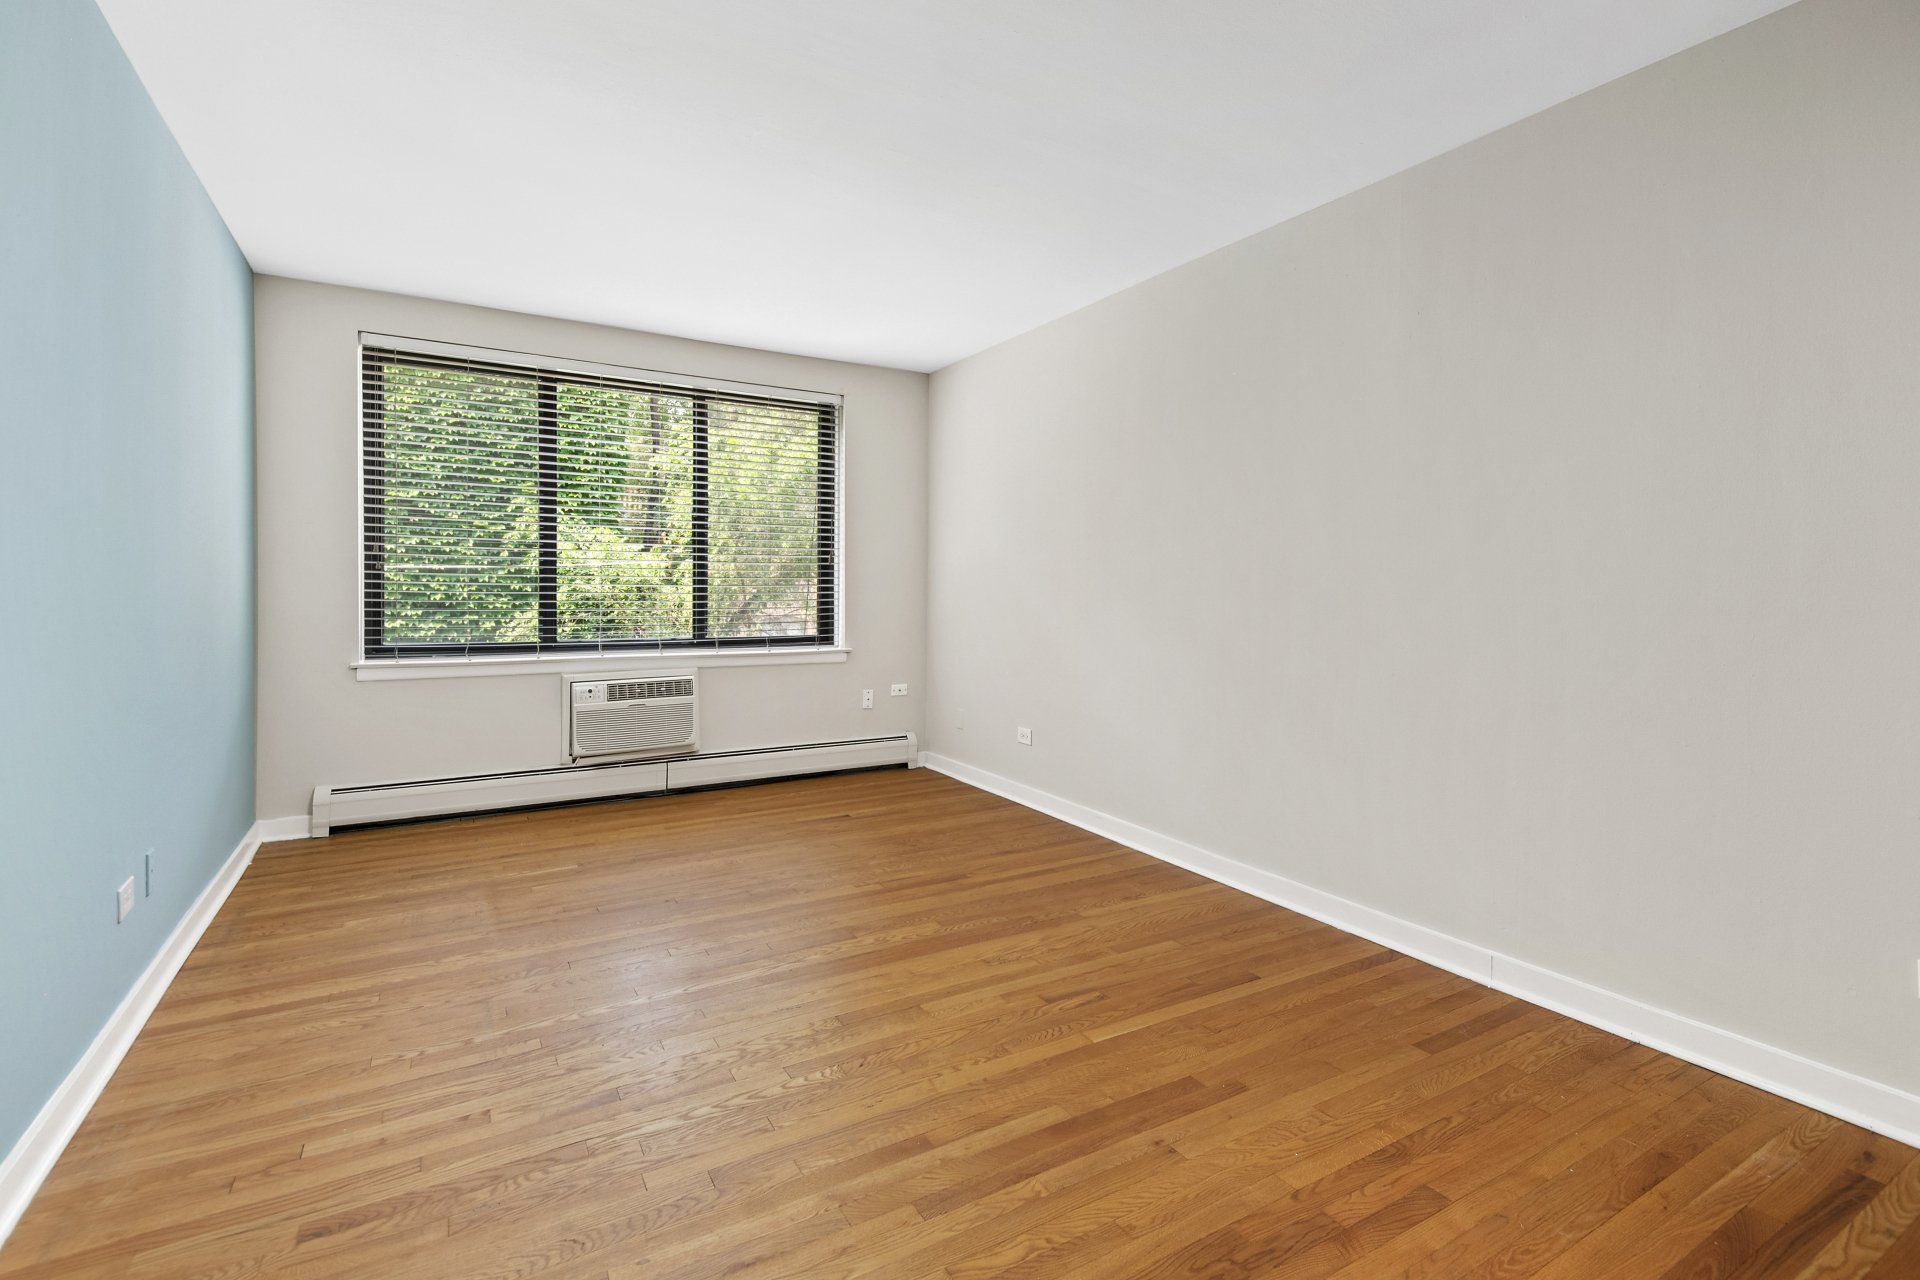 An empty living room with hardwood floors and a large window at Reside on Pine Grove.